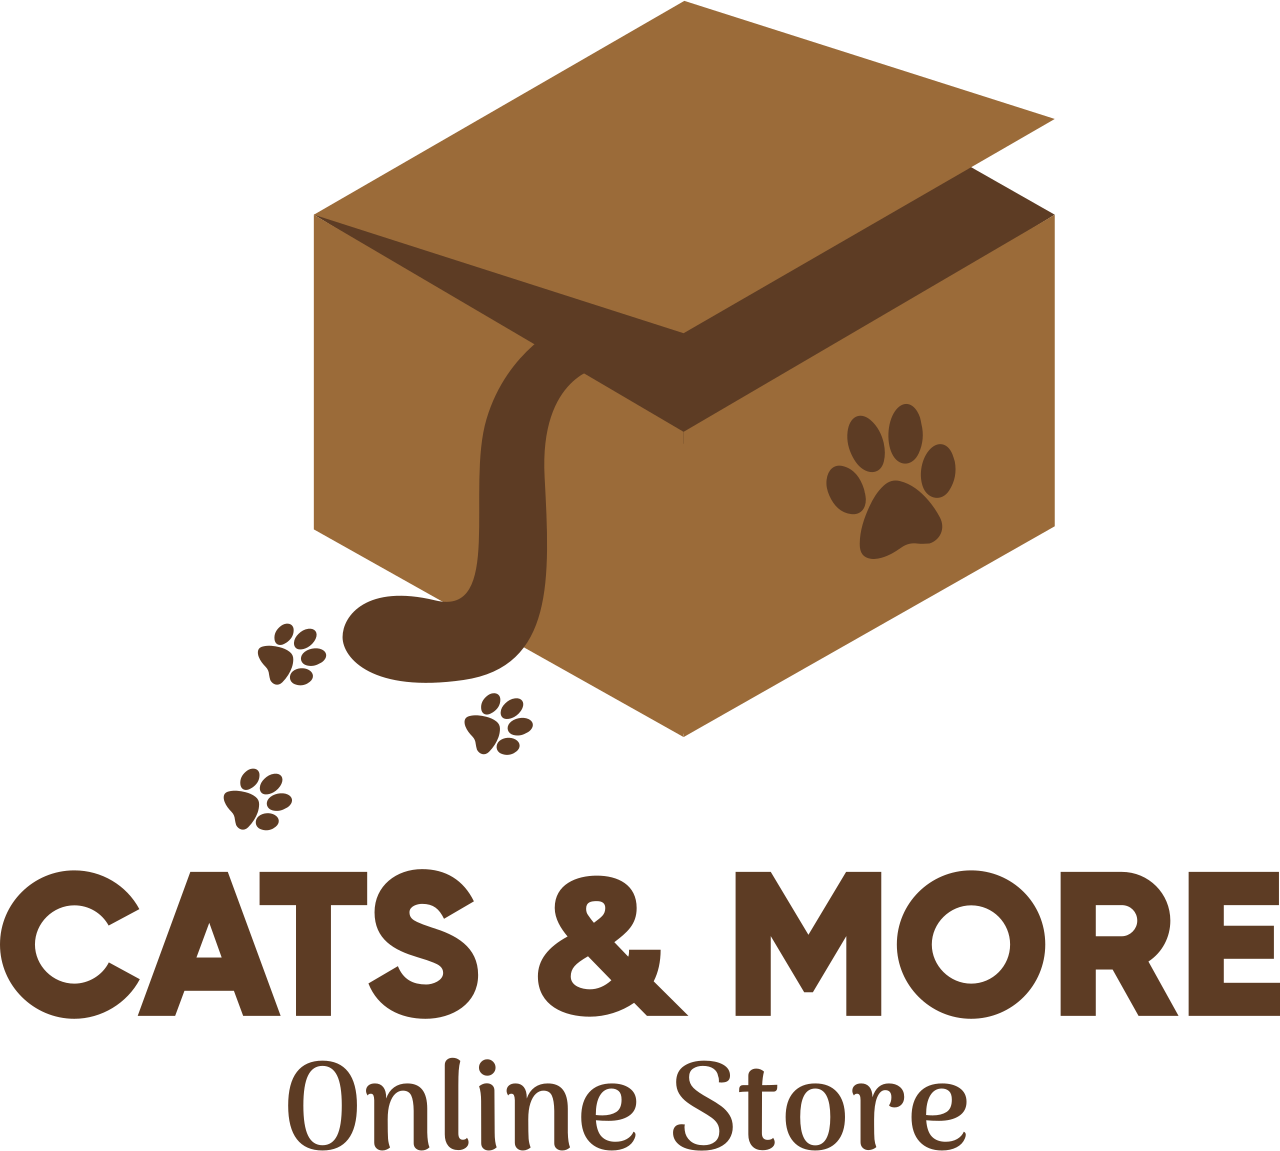 Cats & More's logo